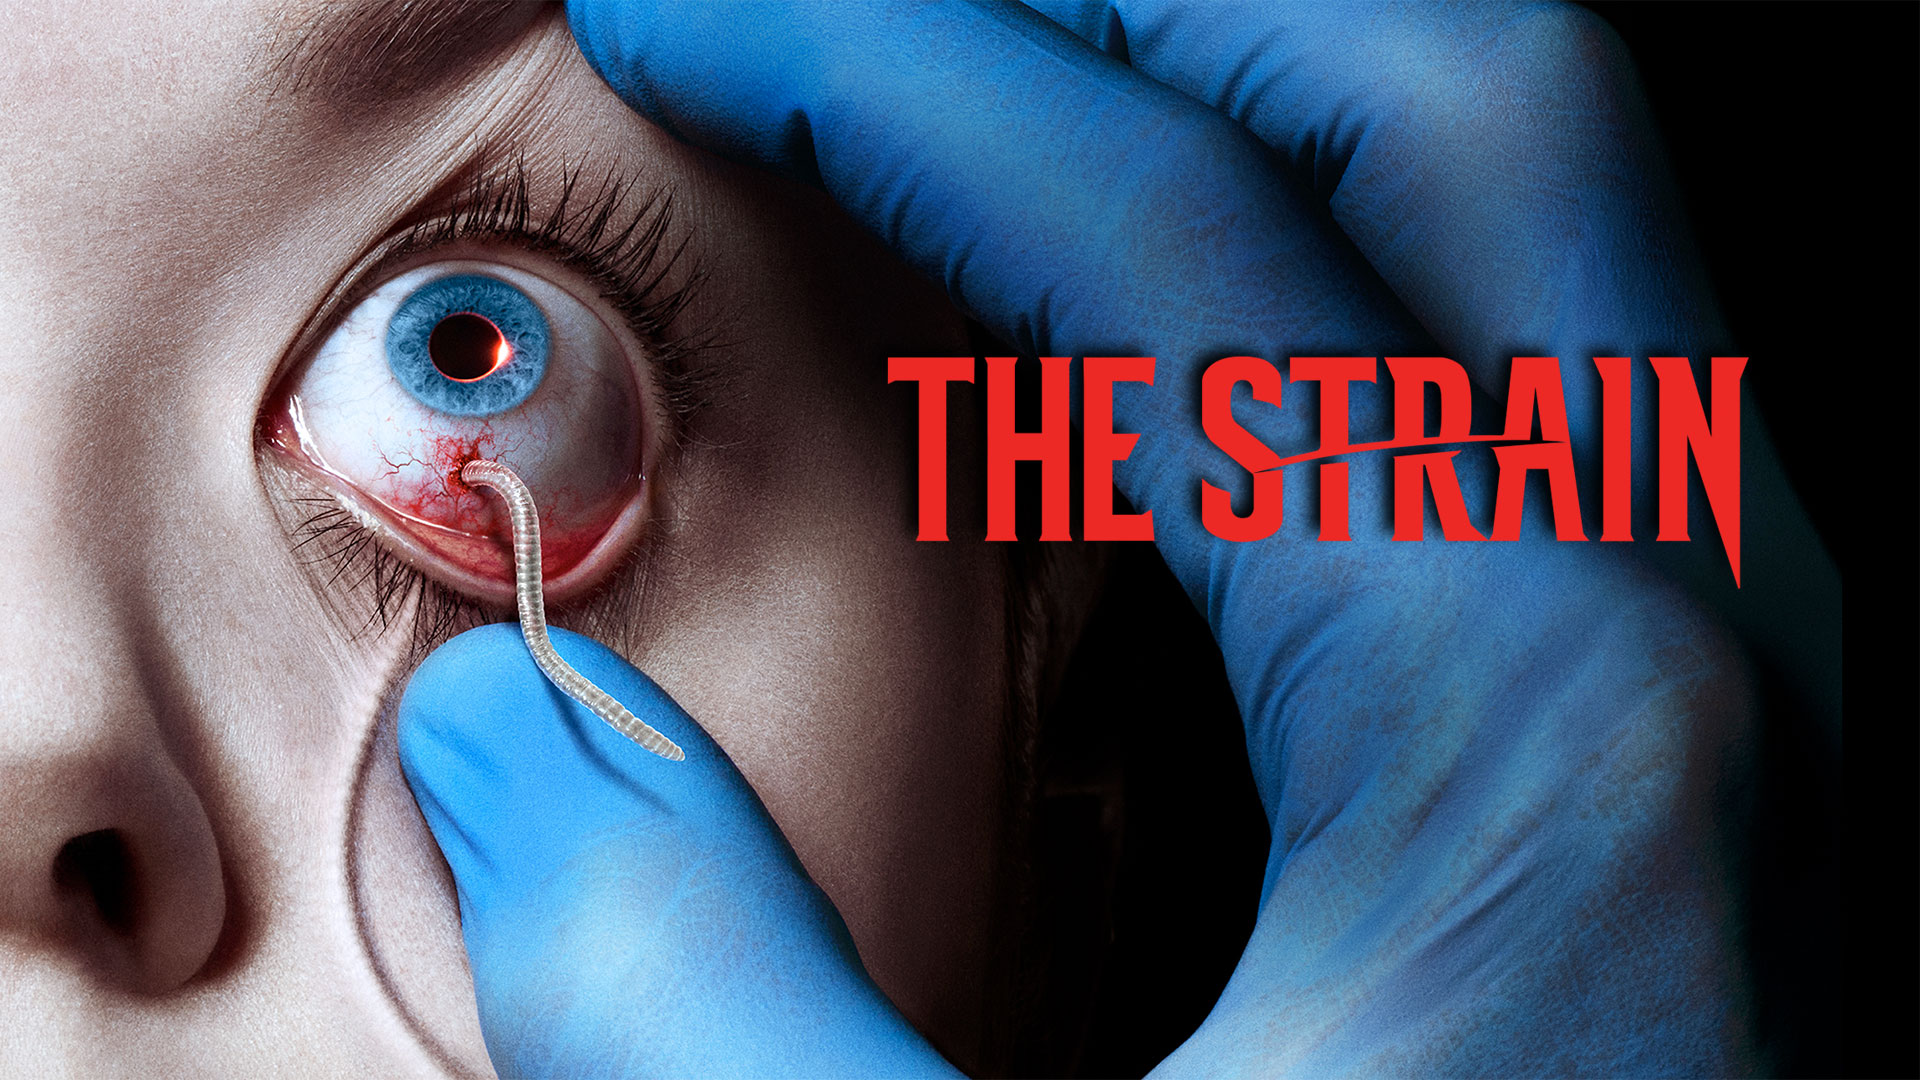 Images of The Strain | 1920x1080